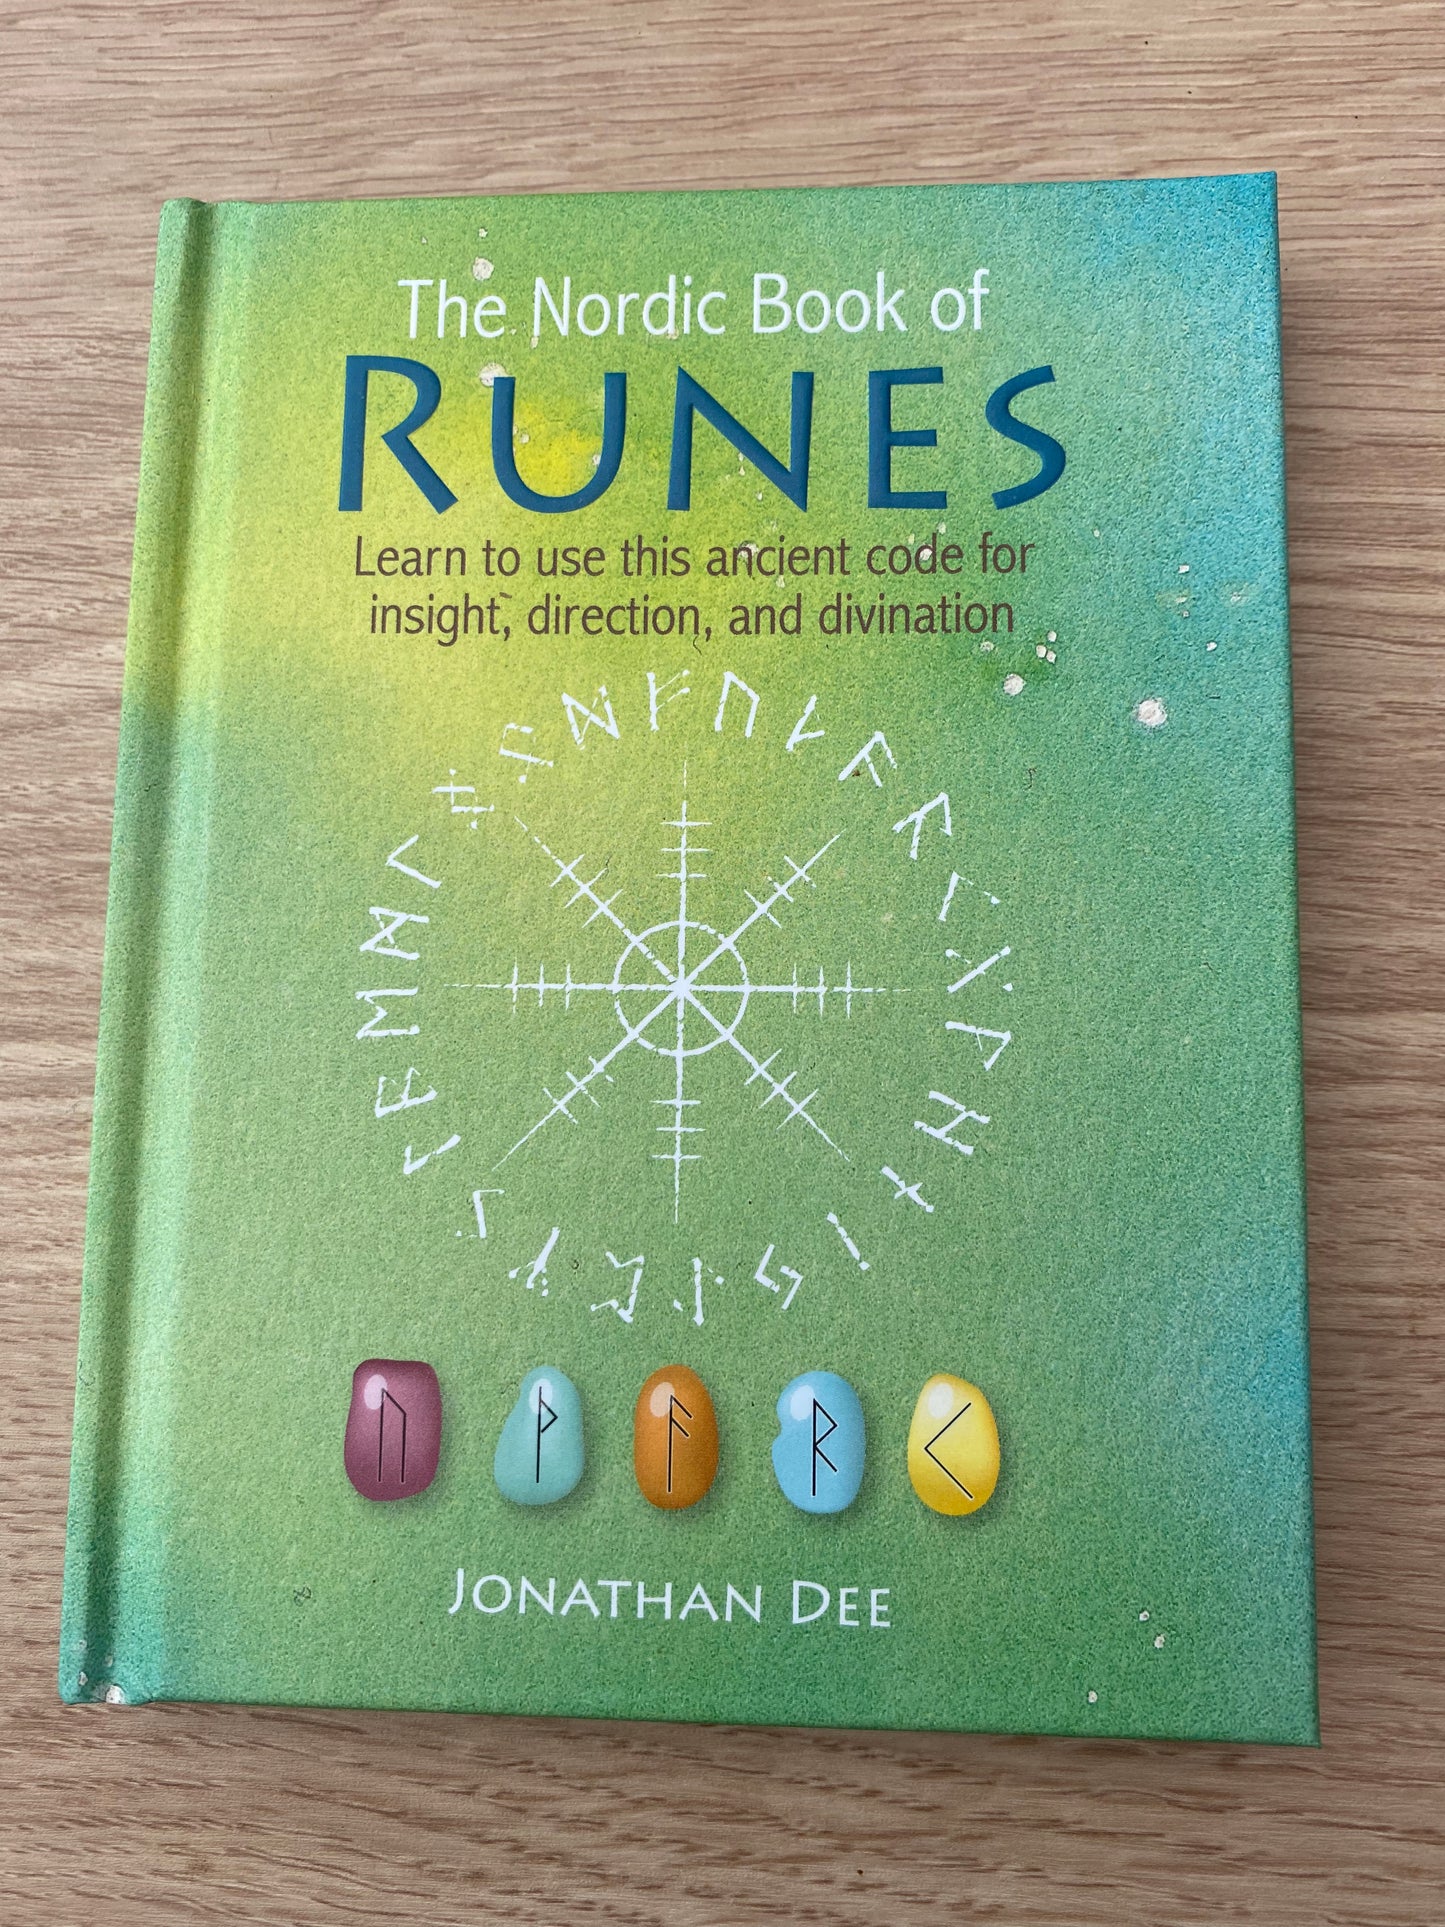 The Nordic Book of Runes by Jonathan Dee